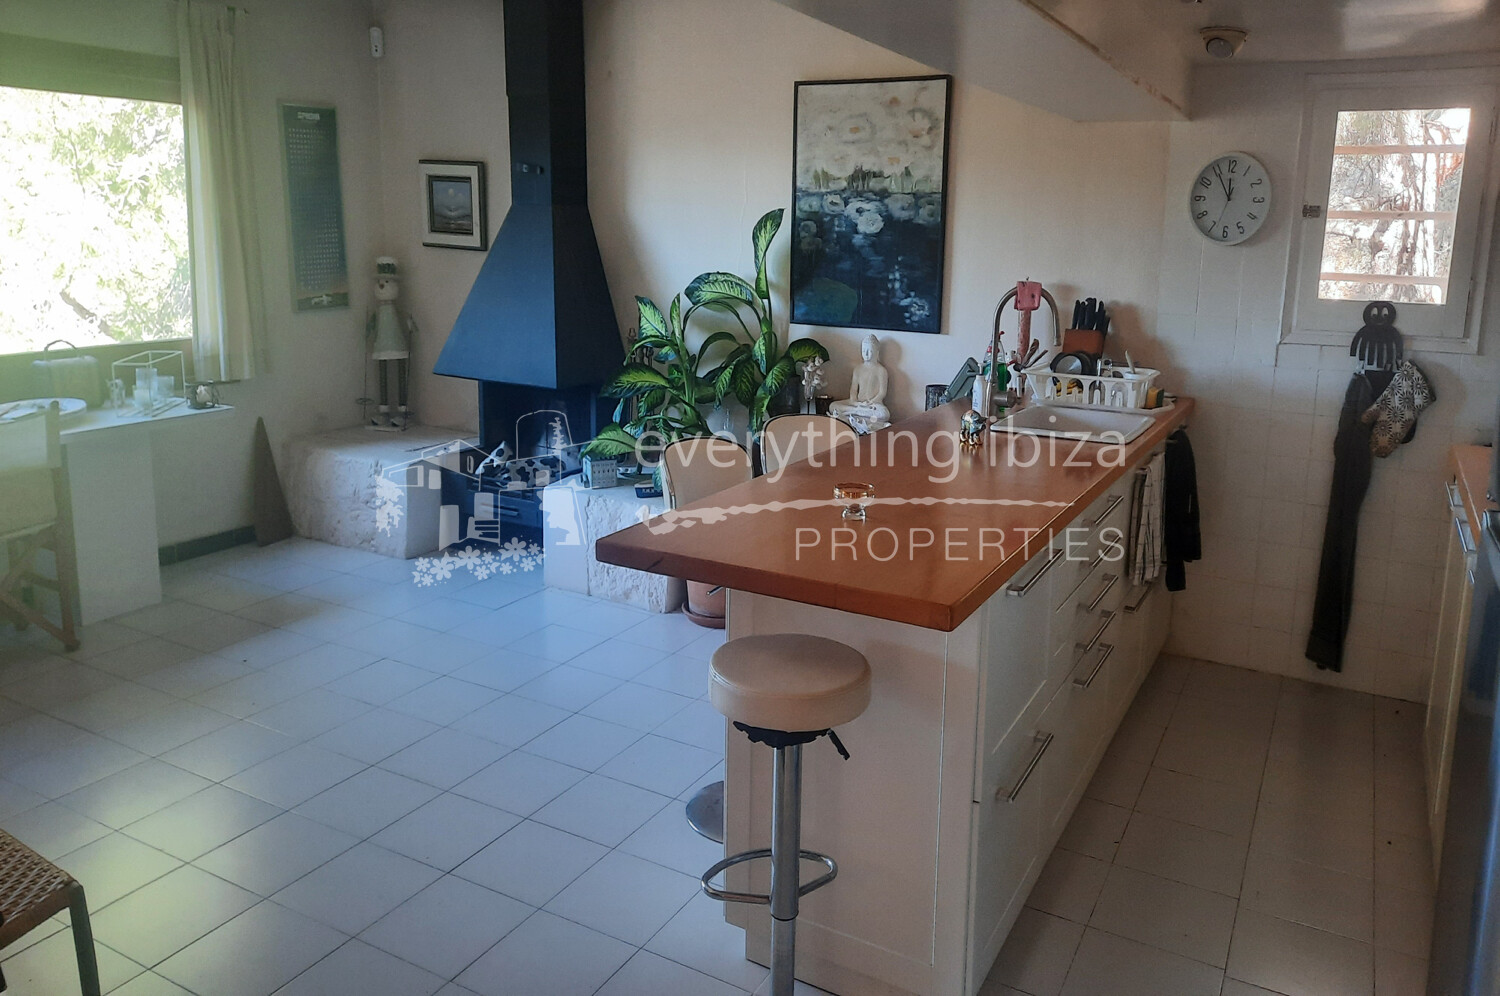 Charming Authentic Villa in a Hillside Position Overlooking Las Salinas, ref. 1702, for sale in Ibiza by everything ibiza Properties